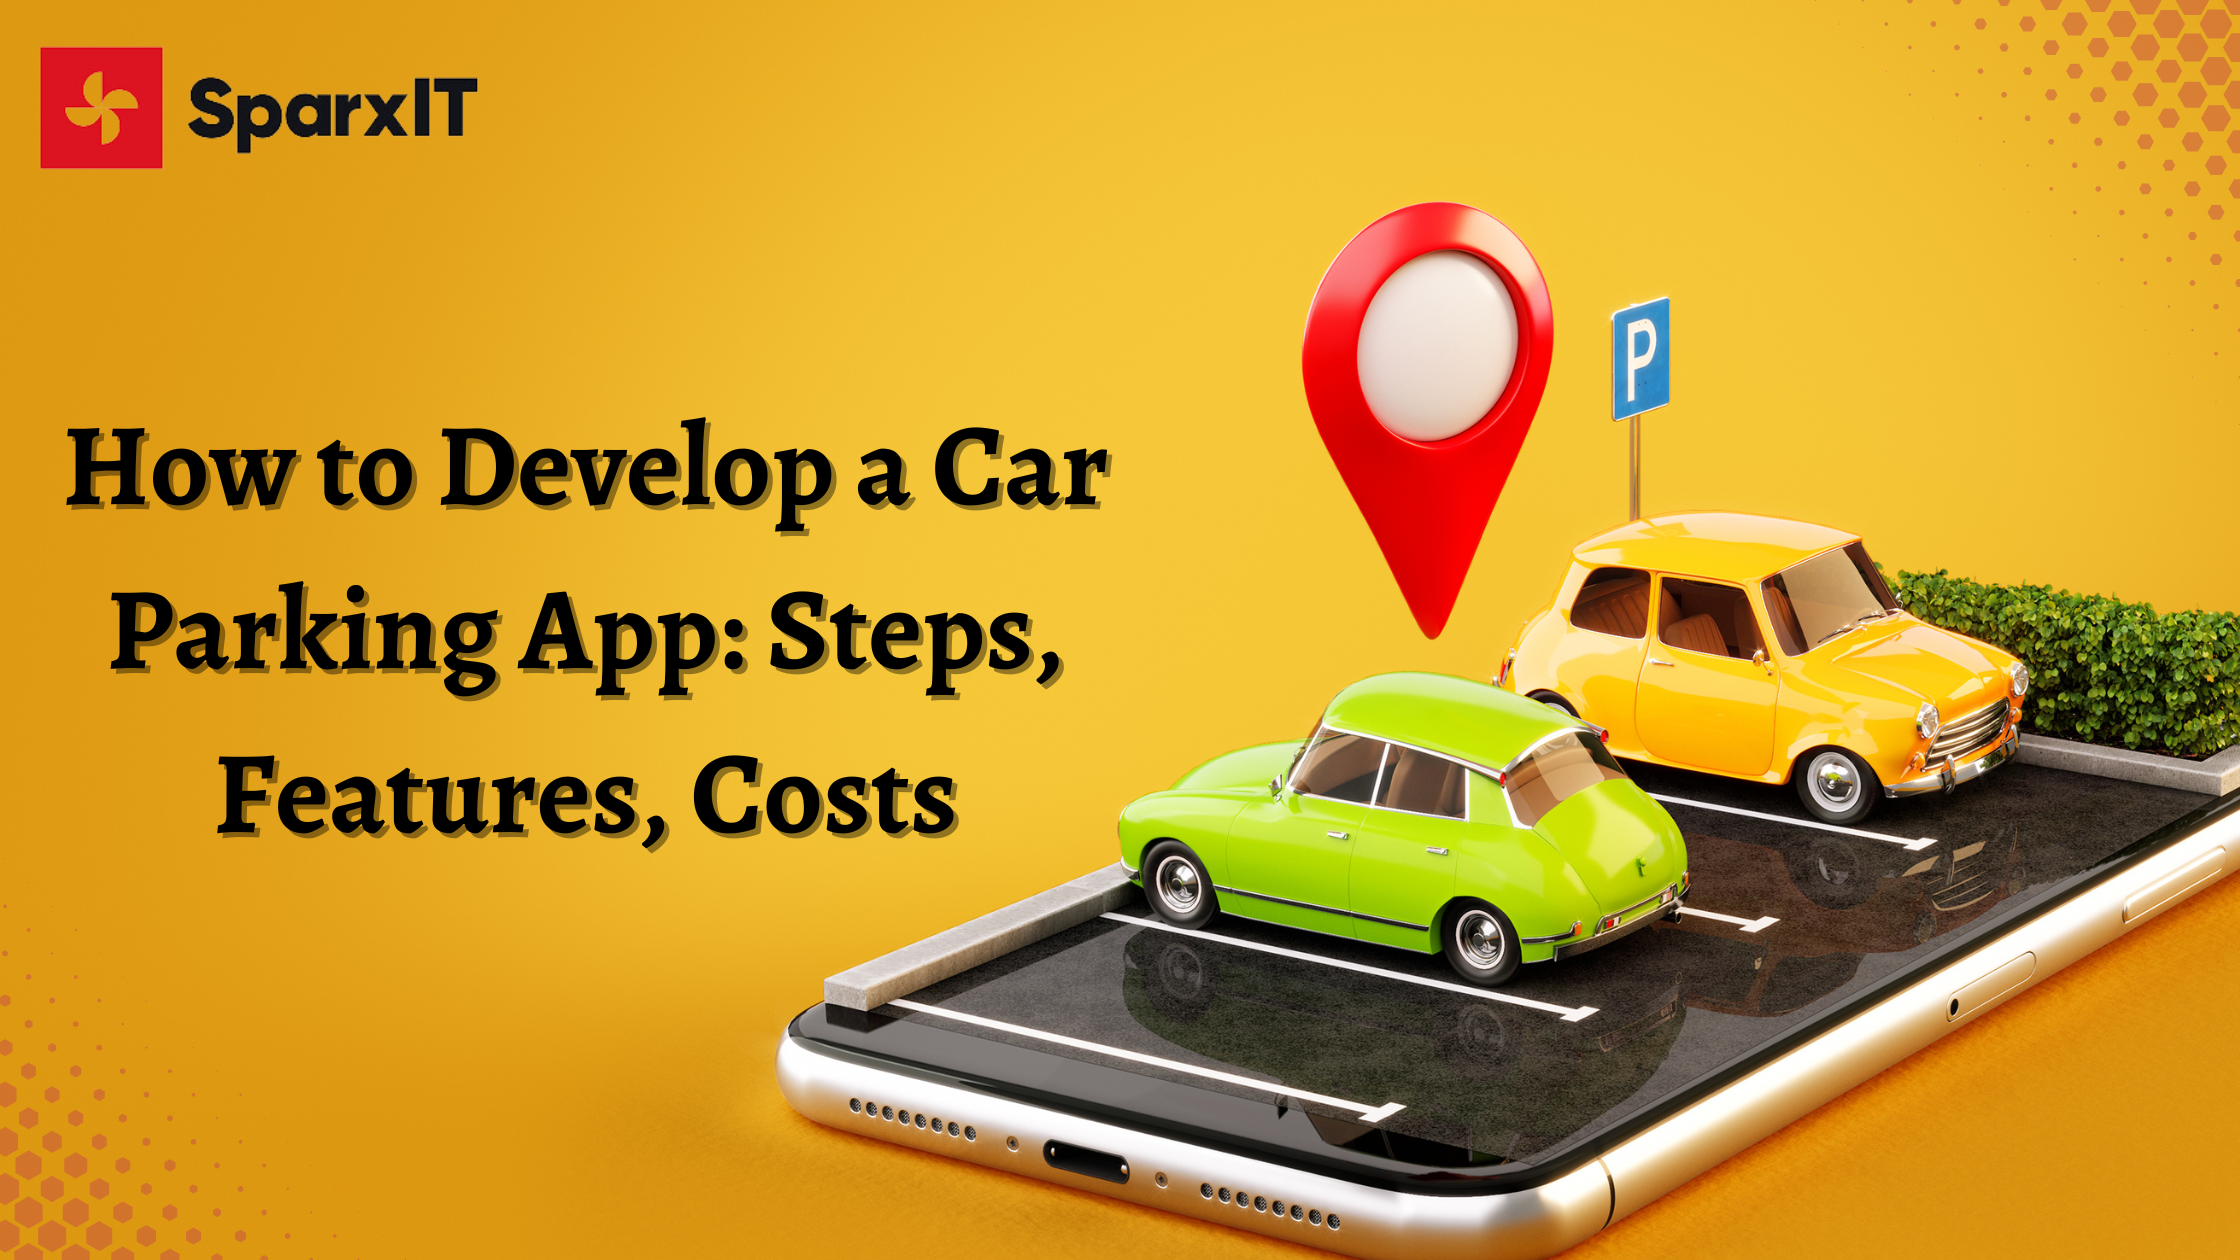 How to Develop a Car Parking App: Steps, Features, Costs